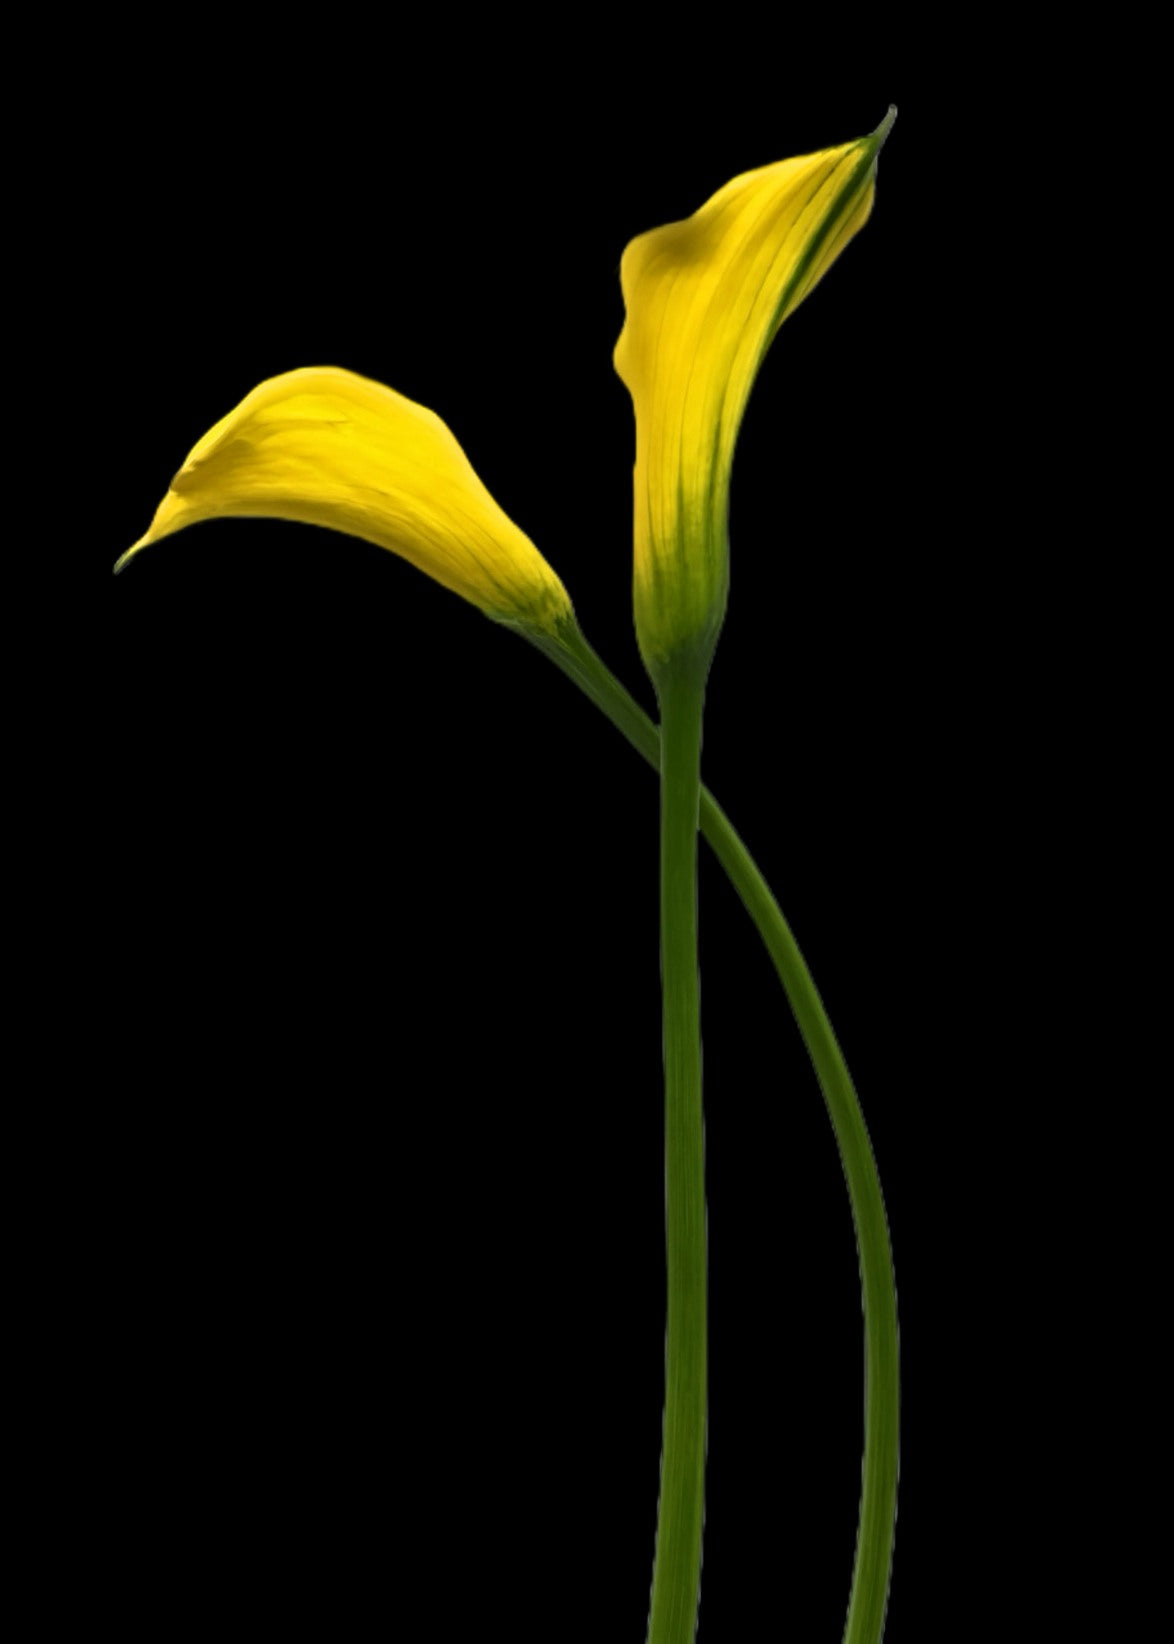 Two Yellow Calla Lilies on black background Notecard